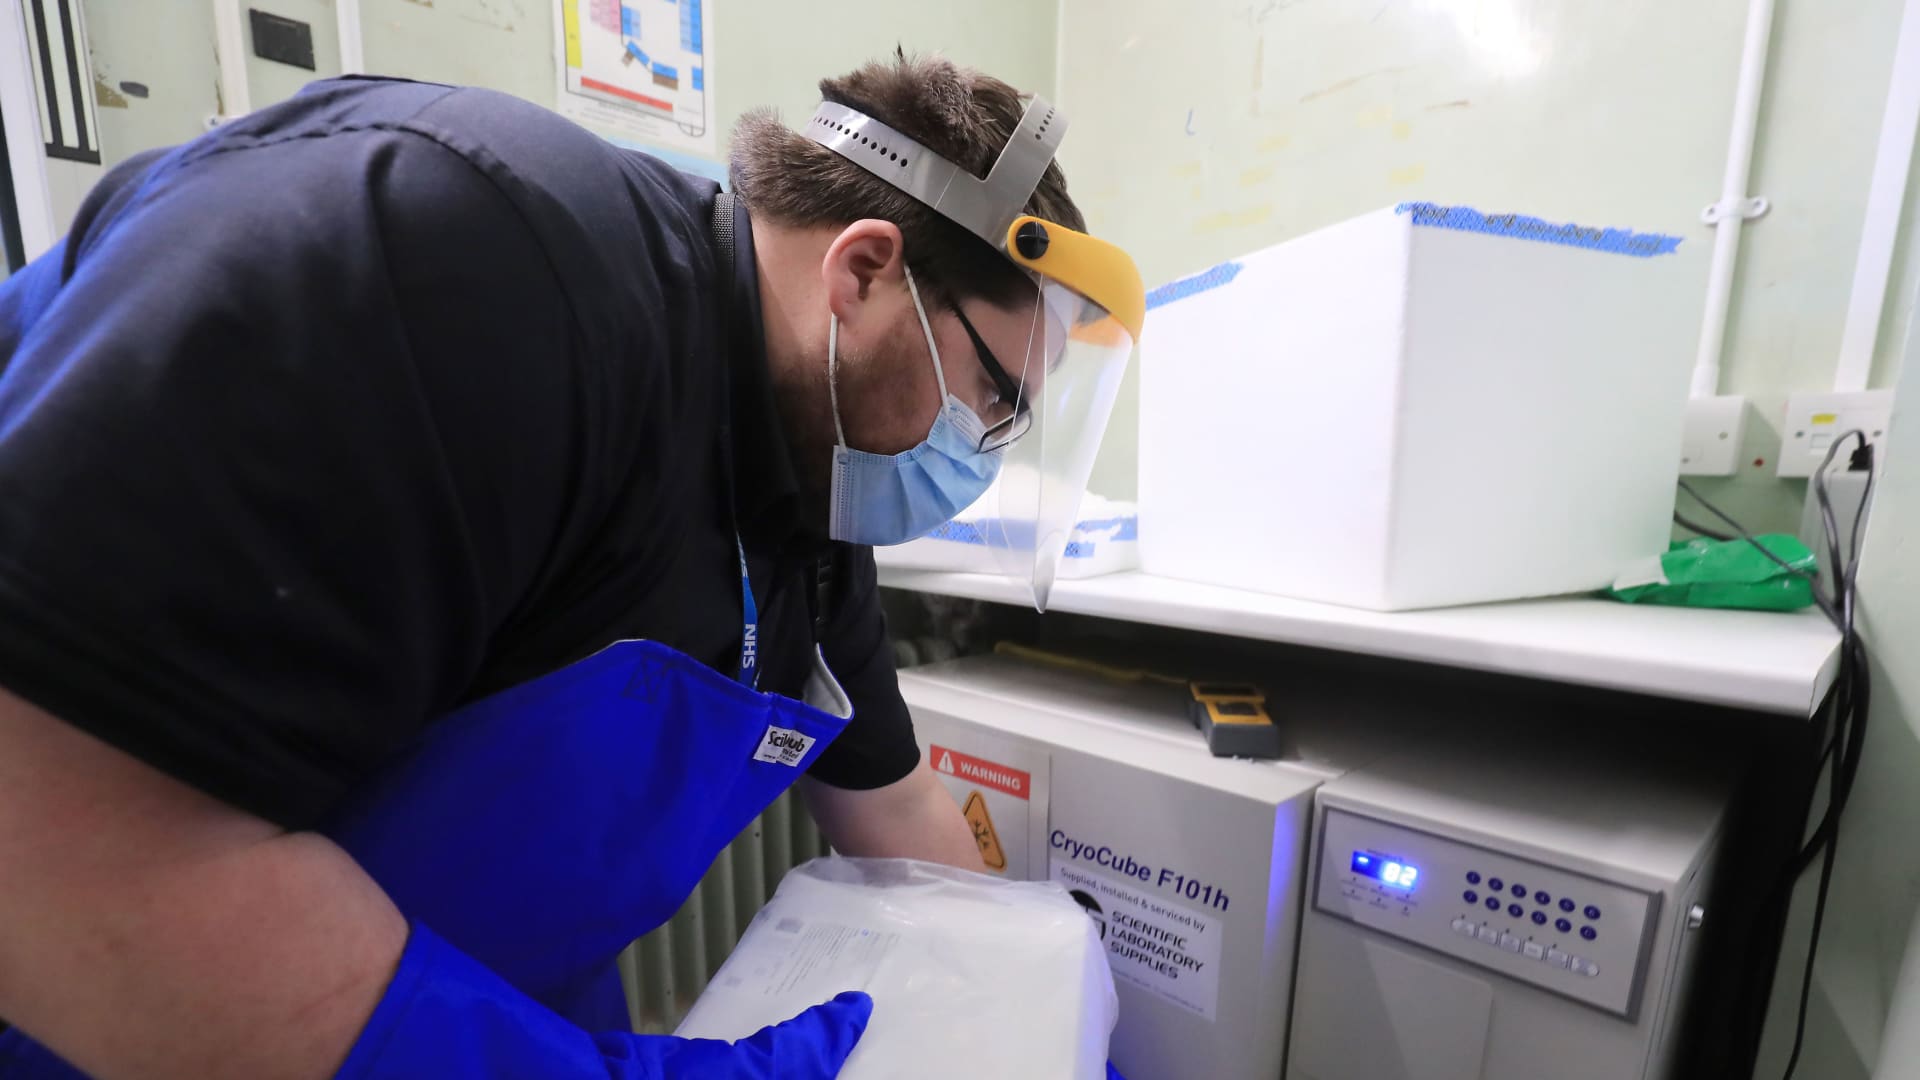 A pharmacy technician from Croydon Health Services takes delivery of the first batch of Covid-19 vaccinations at Croydon University Hospital in south London on December 5, 2020.